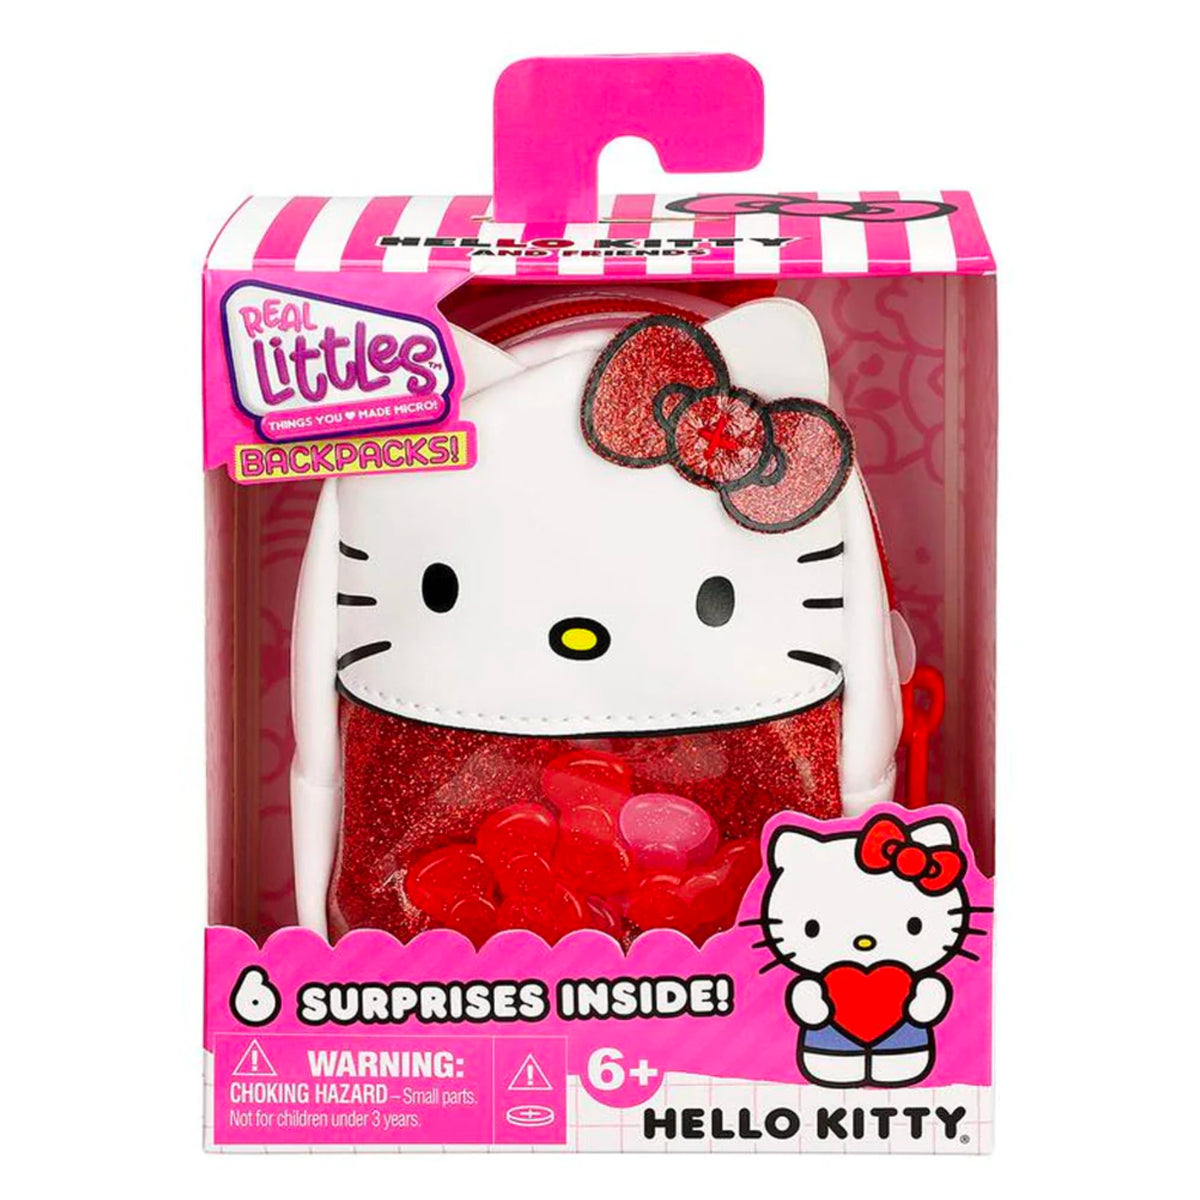 Real Littles - Hello Kitty Mini Backpack Mystery NEW RELEASE